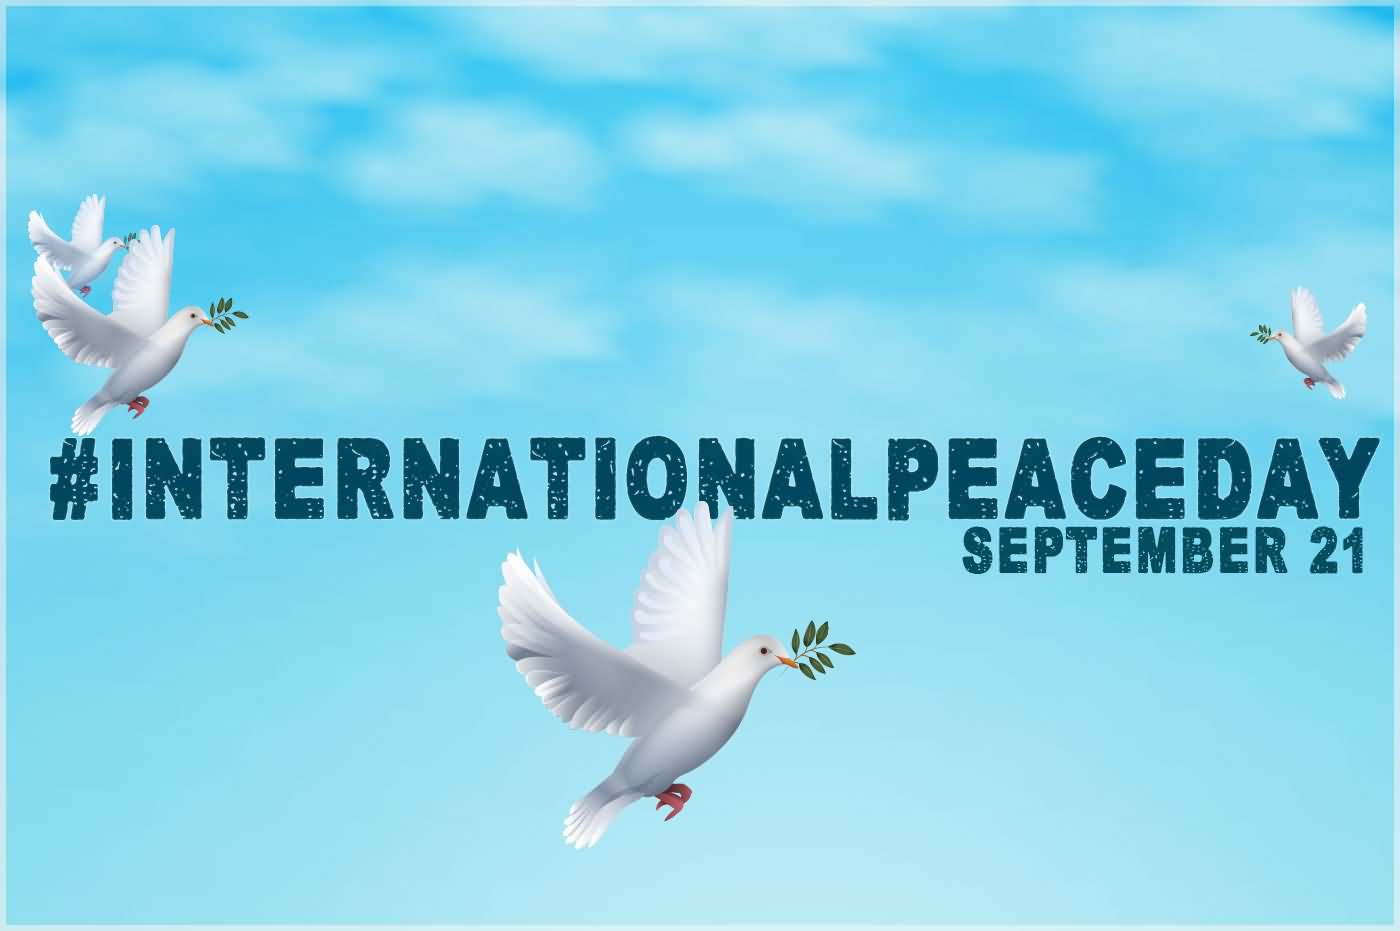 International Peace Day Sepetember 21 Flying Doves With Olive Branch In Mouth